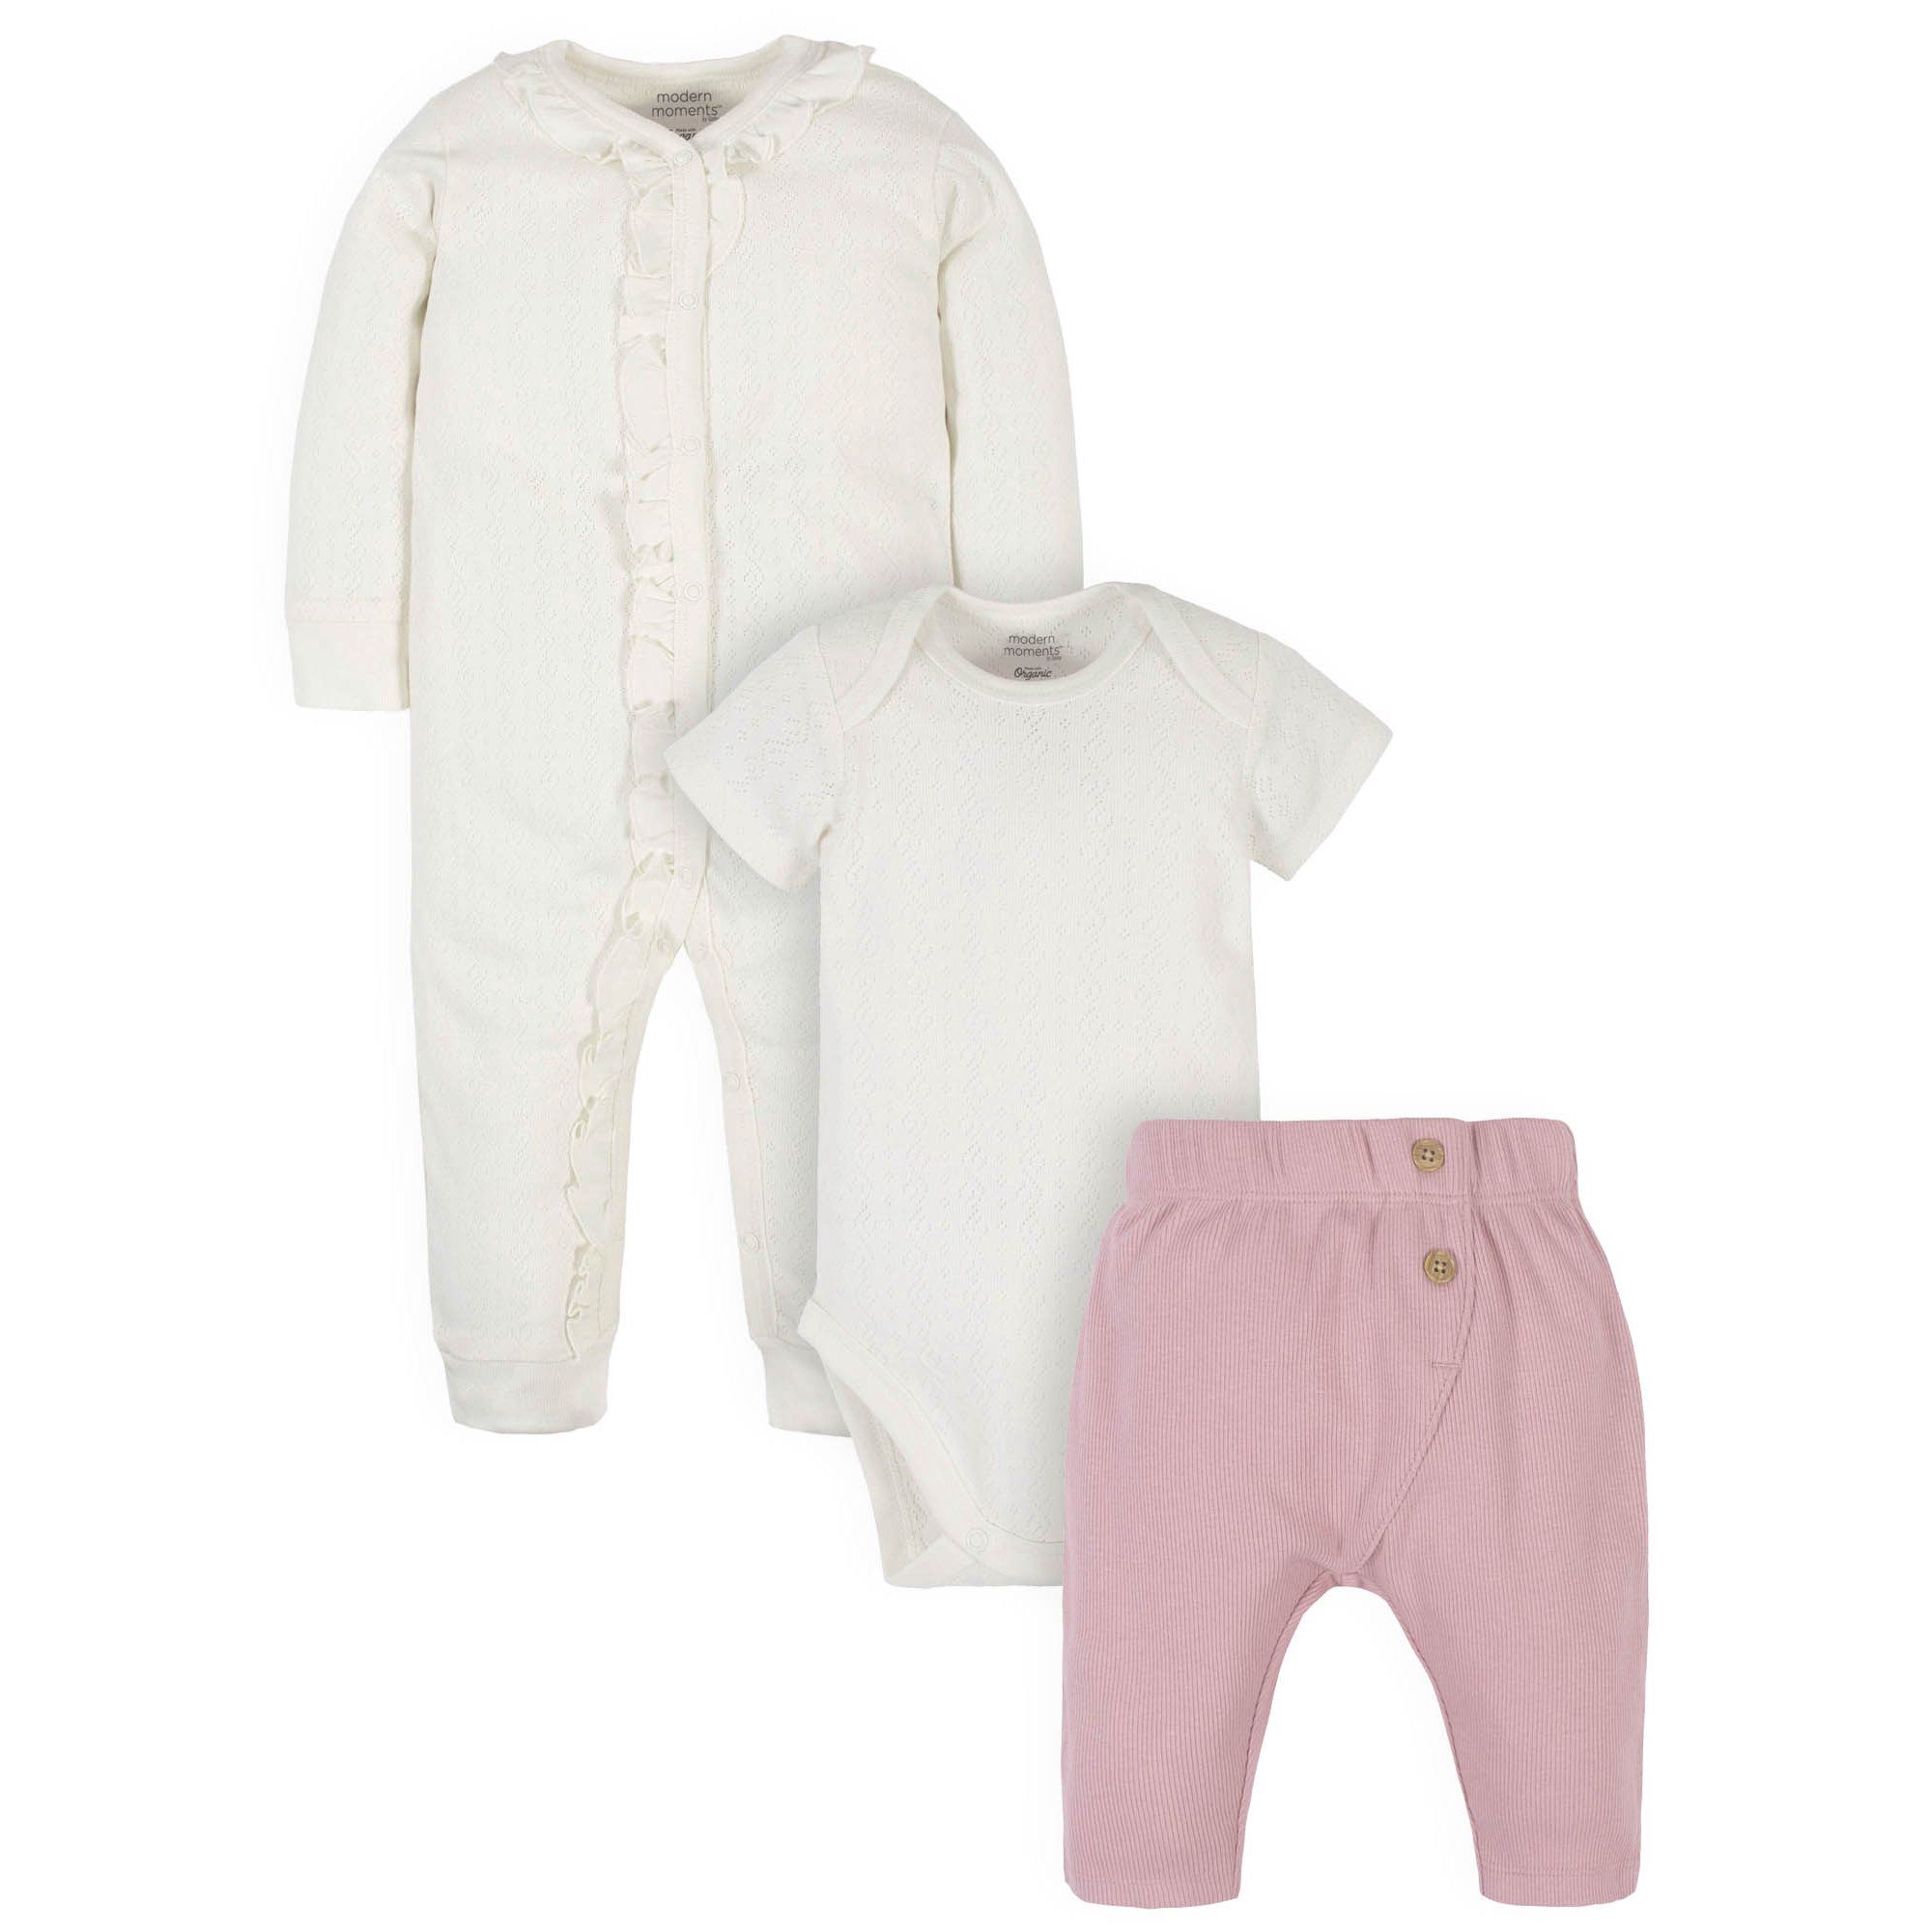 Modern Moments by Gerber® Baby Girl Onesies® Bodysuit, Coveralls, and Pants Set, 3-Piece | Walmart (US)